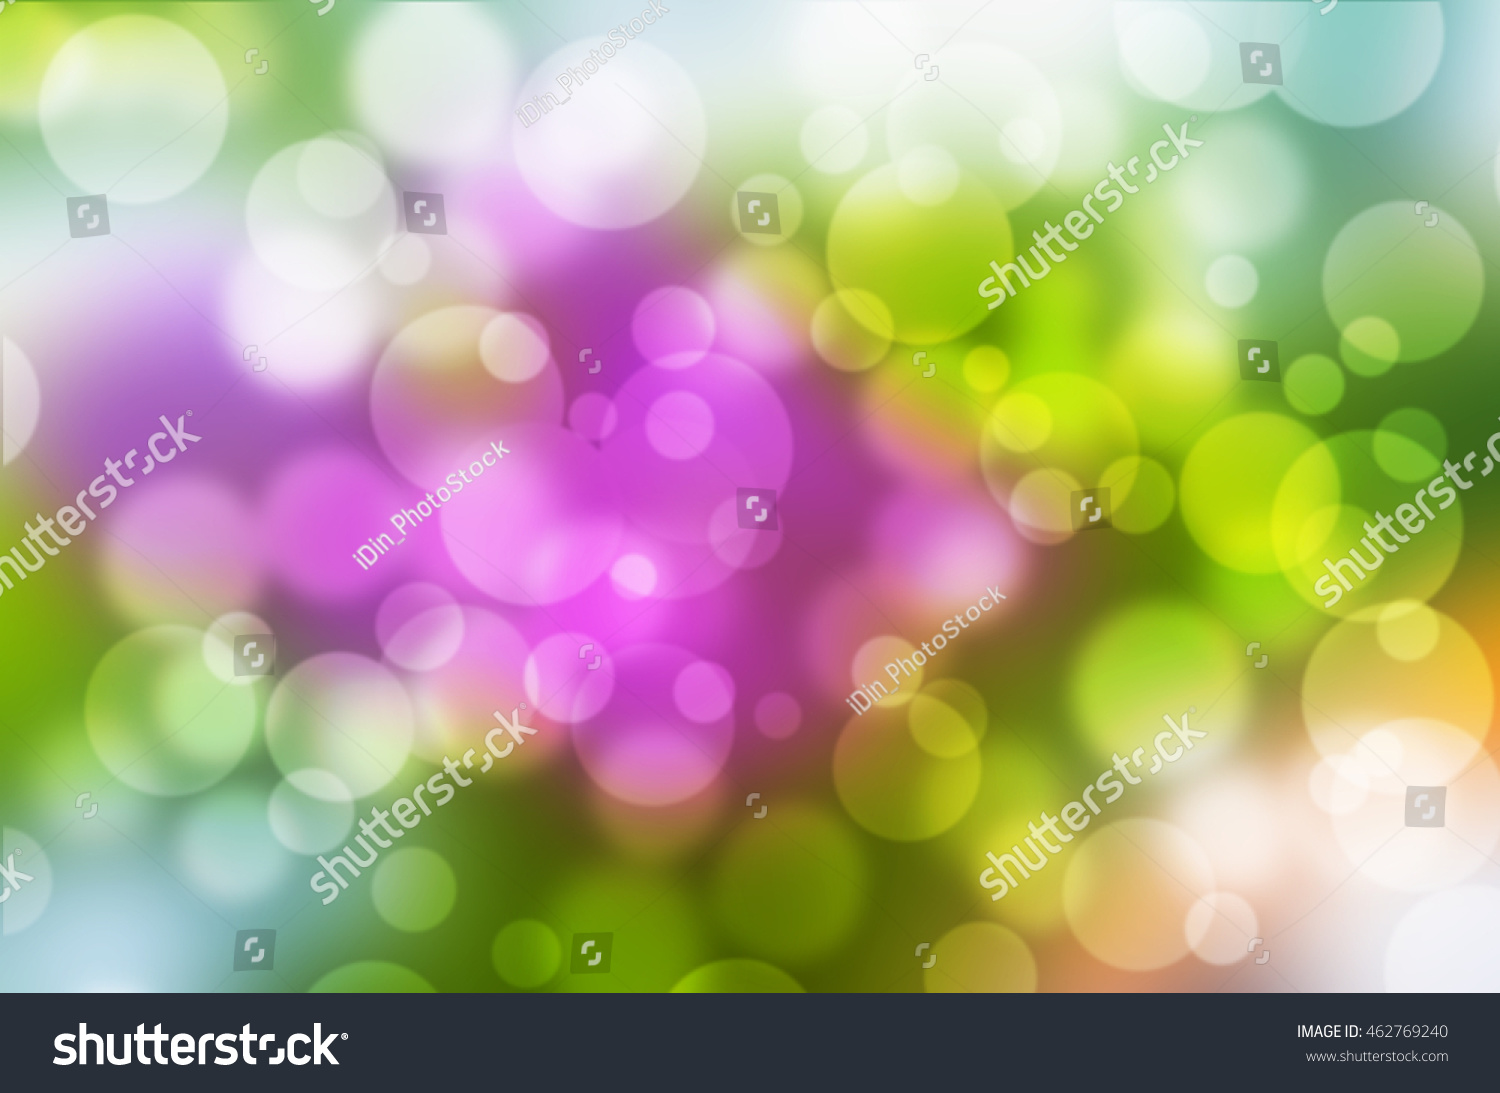 Pink Flowers On Blurred Background Stock Photo 462769240 : Shutterstock